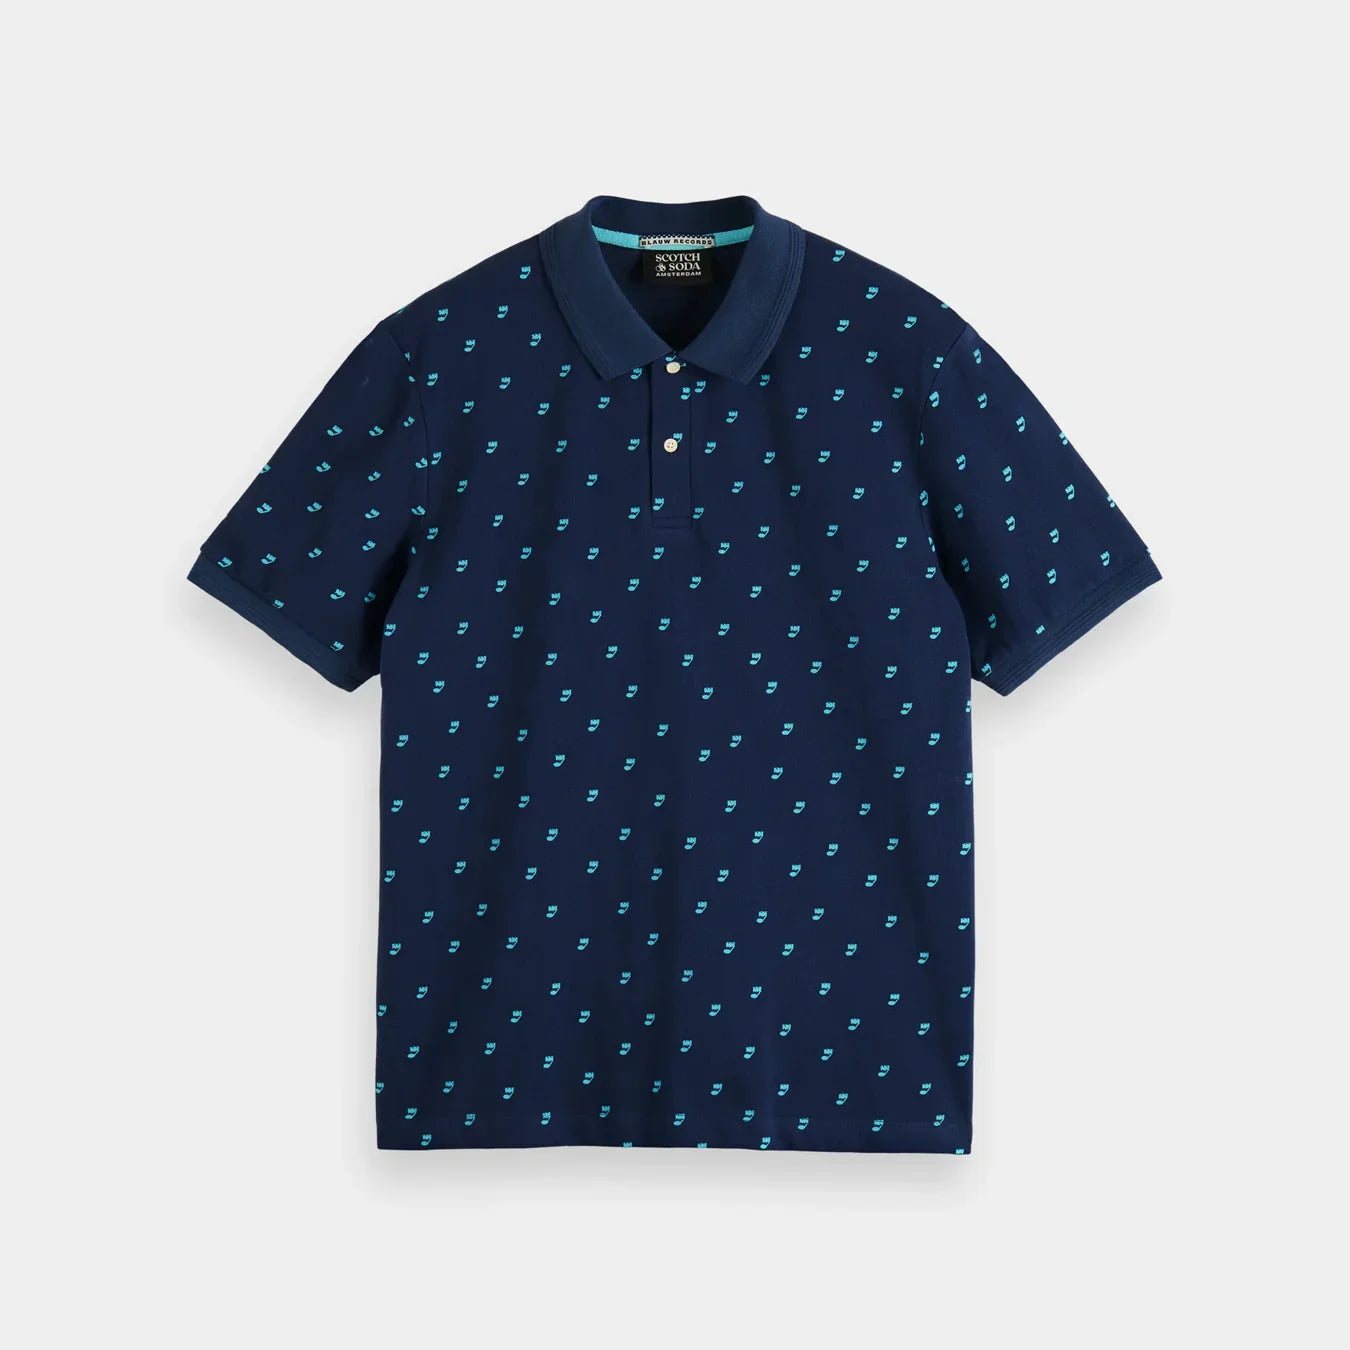 'Scotch & Soda Music Note Steel Printed Polo' in 'Steel Navy' colour